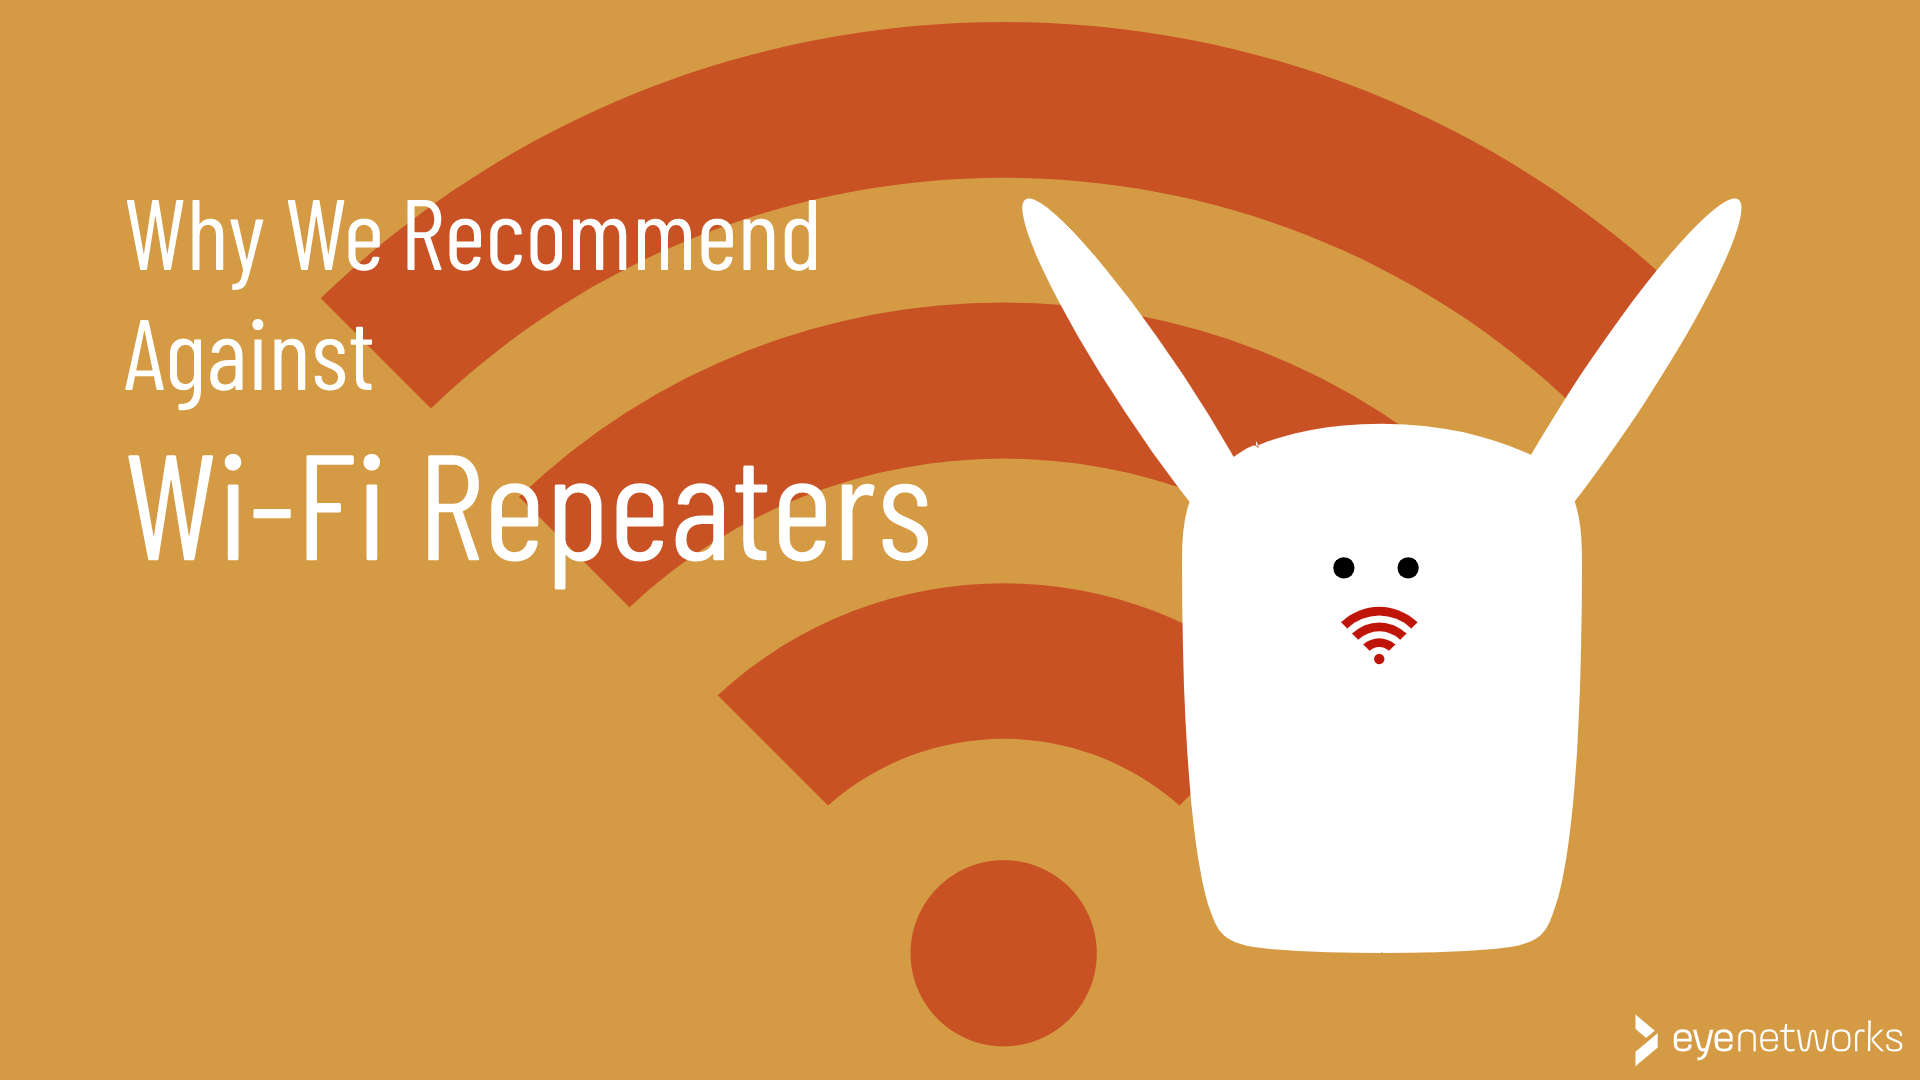 Five Good to Get a Wi-Fi Repeater